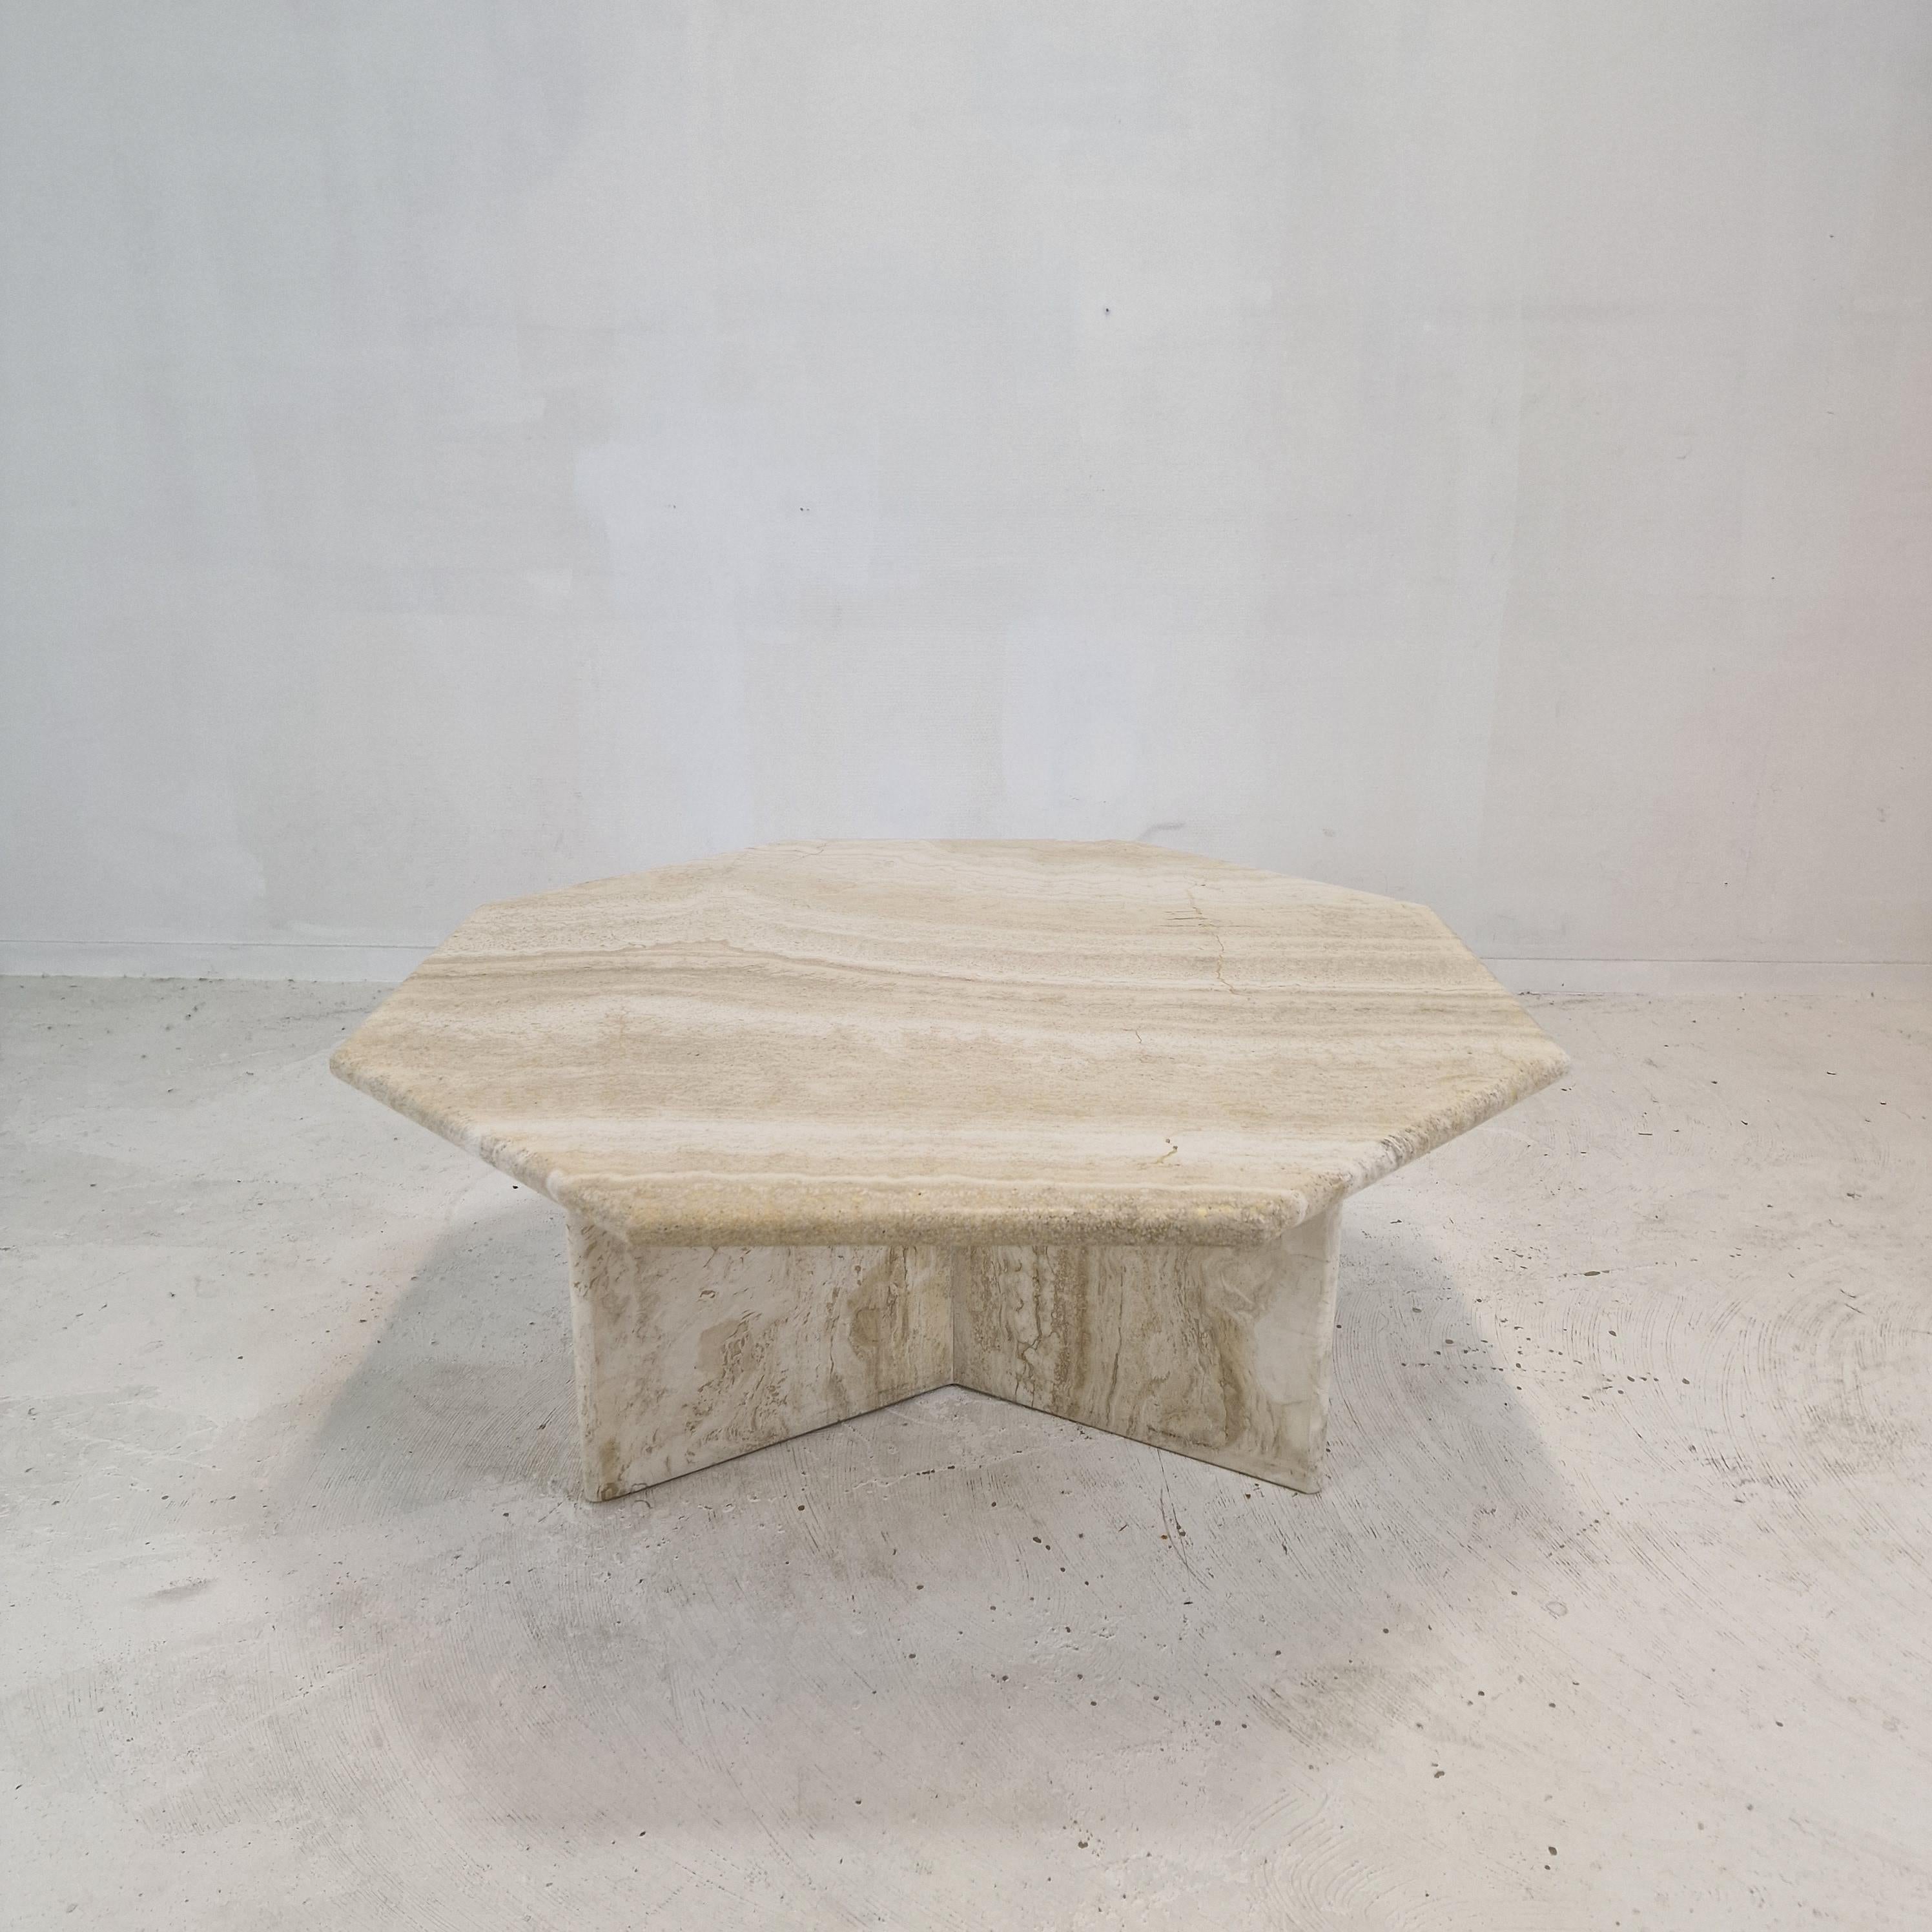 Very nice Italian coffee table handcrafted out of travertine.

The beautiful octagon shaped top is rounded on the edge. 
It is made of beautiful travertine.

The 3-legged base is also made of beautiful travertine.

It has the normal traces of